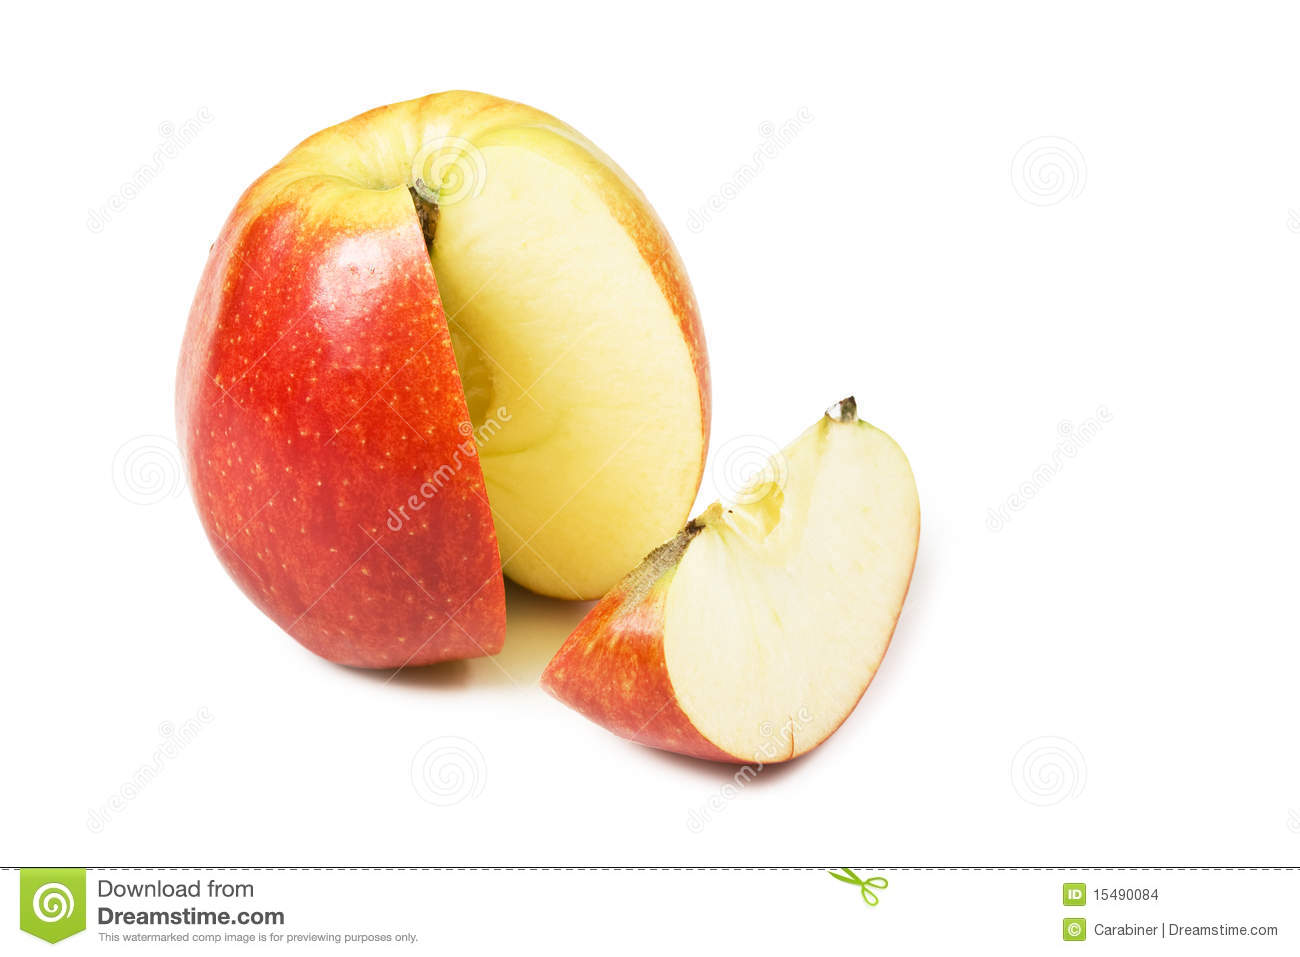 Apple Slices Stock Images   Image  15490084